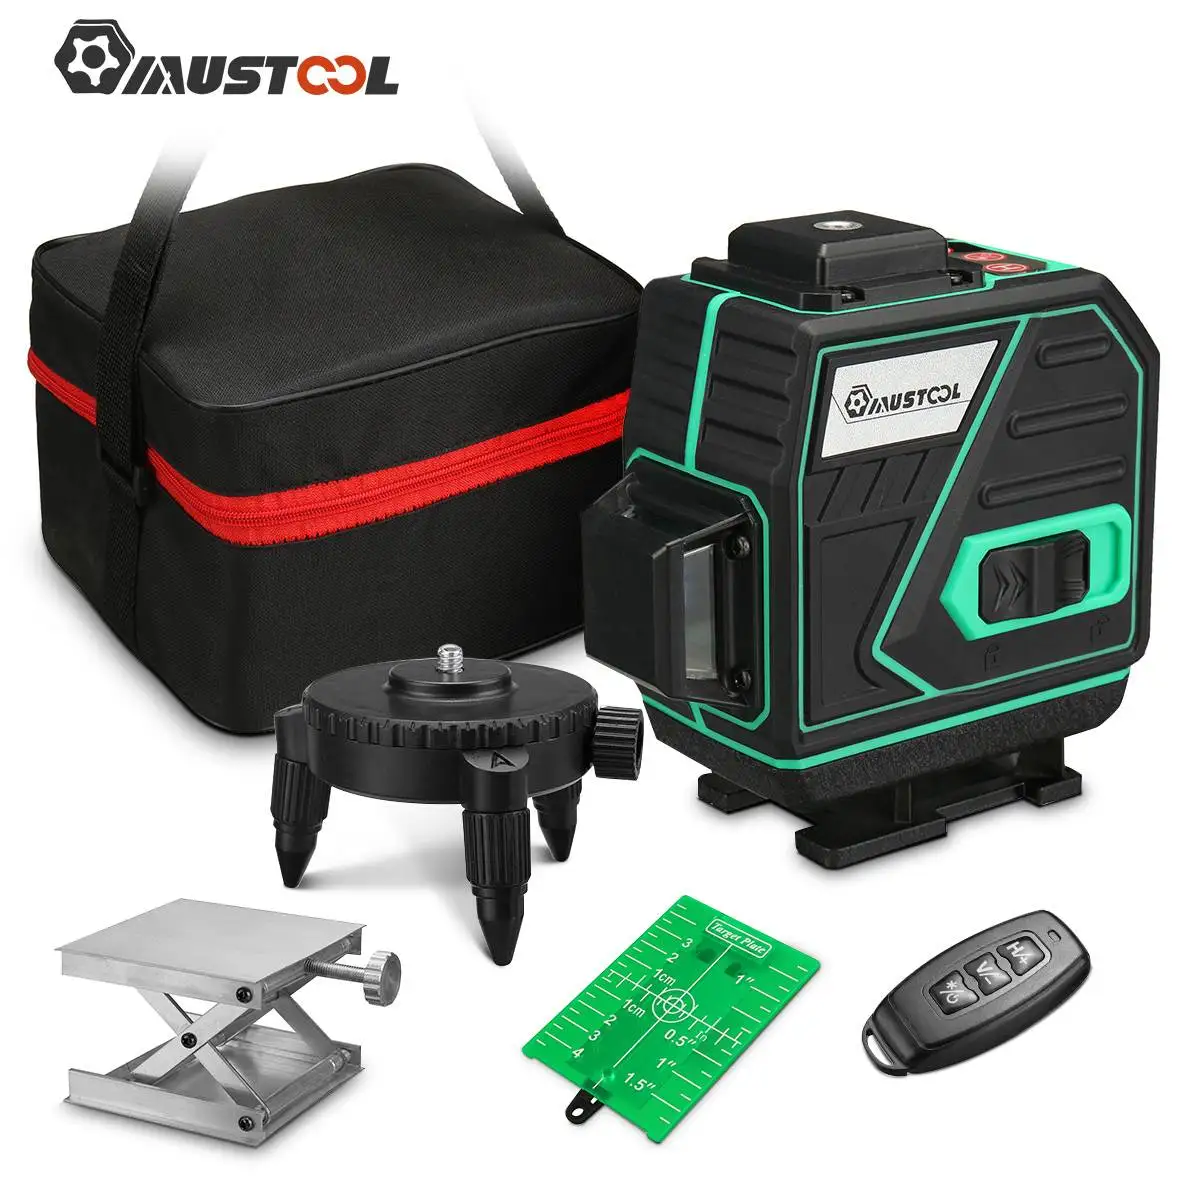 

MUSTOOL 12 Lines 3D Laser Level Self-Leveling 360 Horizontal And Vertical Super Powerful Green Beam Laser Level With 2 Battery